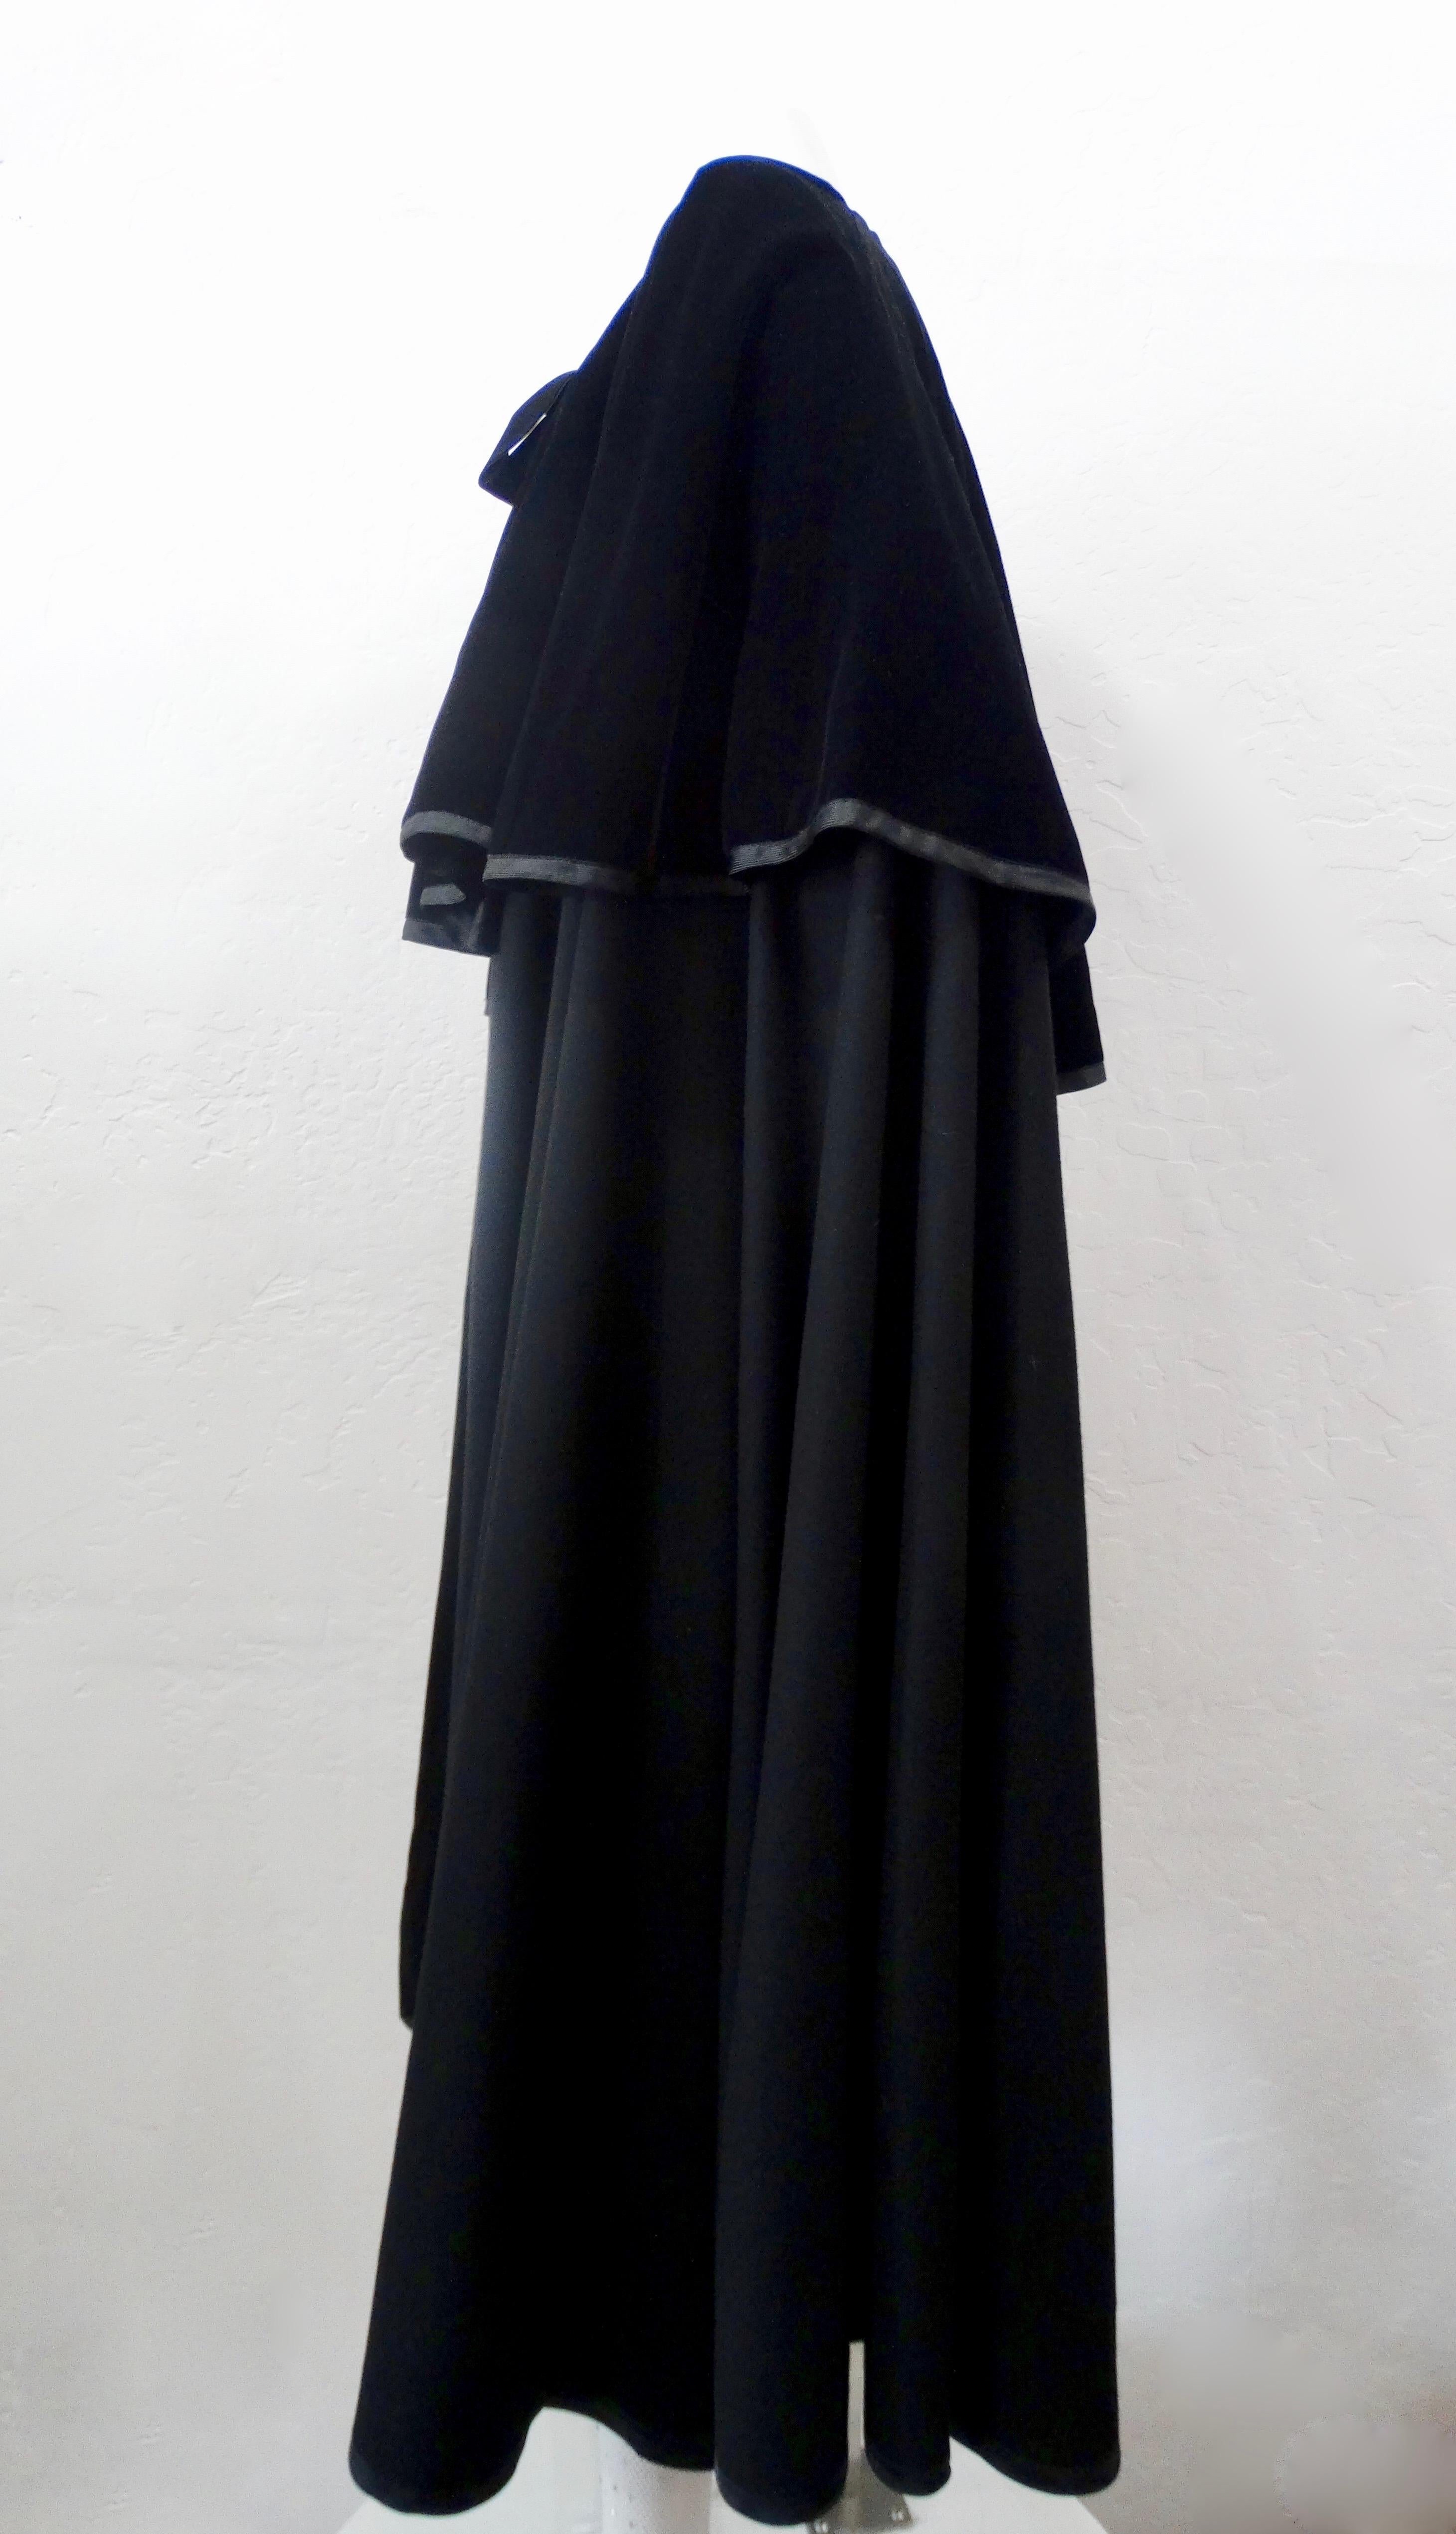 Elevate your wardrobe with this amazing YSL cape! Circa 1980s, this cape is made of black wool and features a black velvet capelet. Includes velvet ties and a roomy fit. A true YSL classic, this piece is perfect for all your winter looks! 